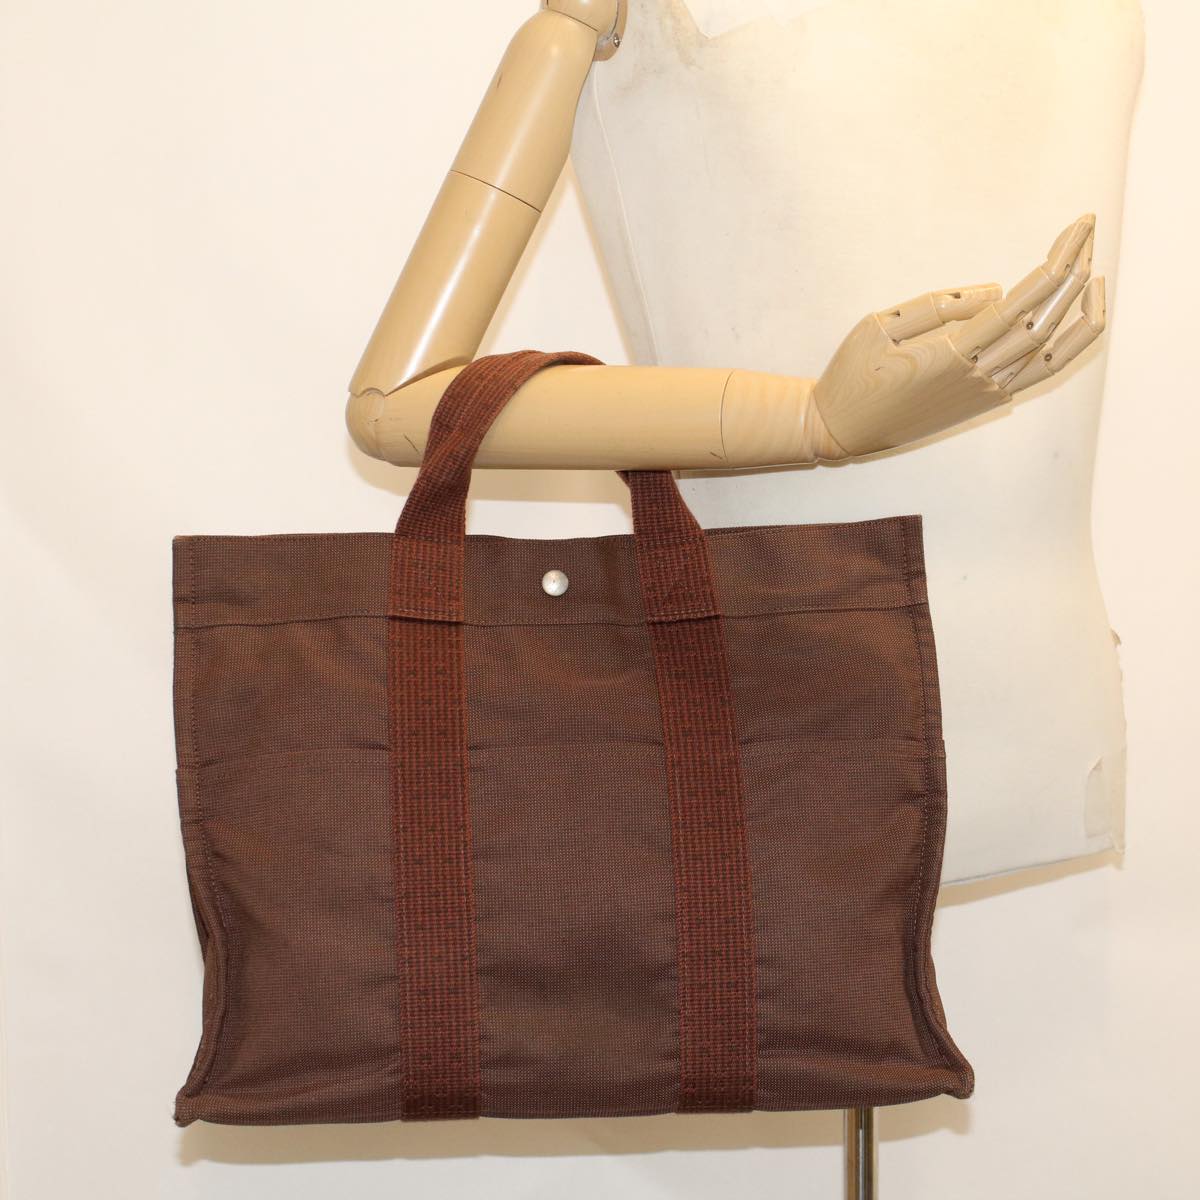 HERMES Her Line Tote Bag Canvas Brown Auth 46779